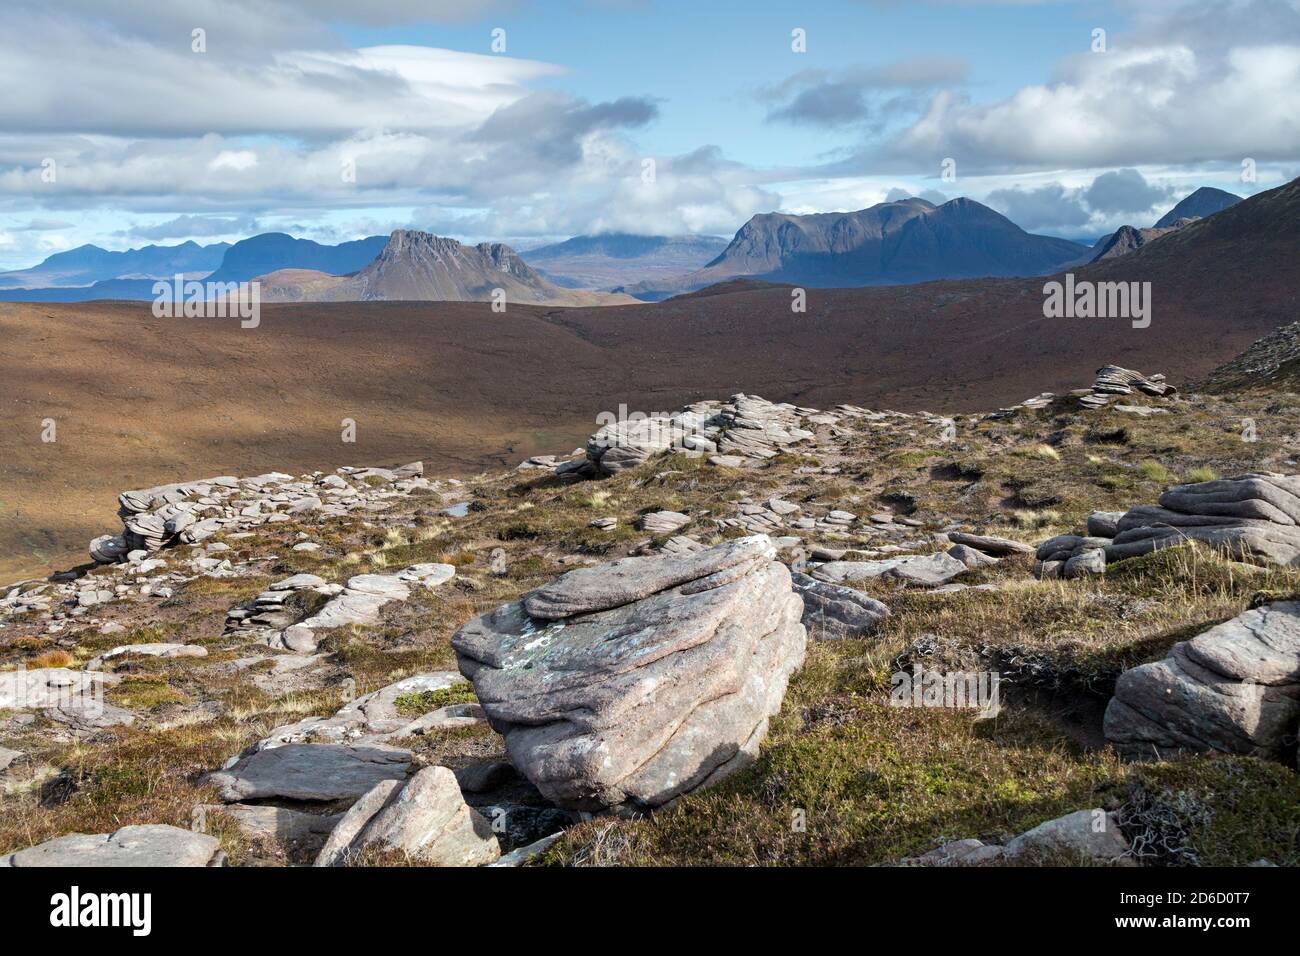 Suilven, Stac Pollaidh and Cull Mor Dominating the View from the Slopes of Cairn Conmheall, Coigach Peninsula, Wester Ross, Highlands of Scotland Stock Photo